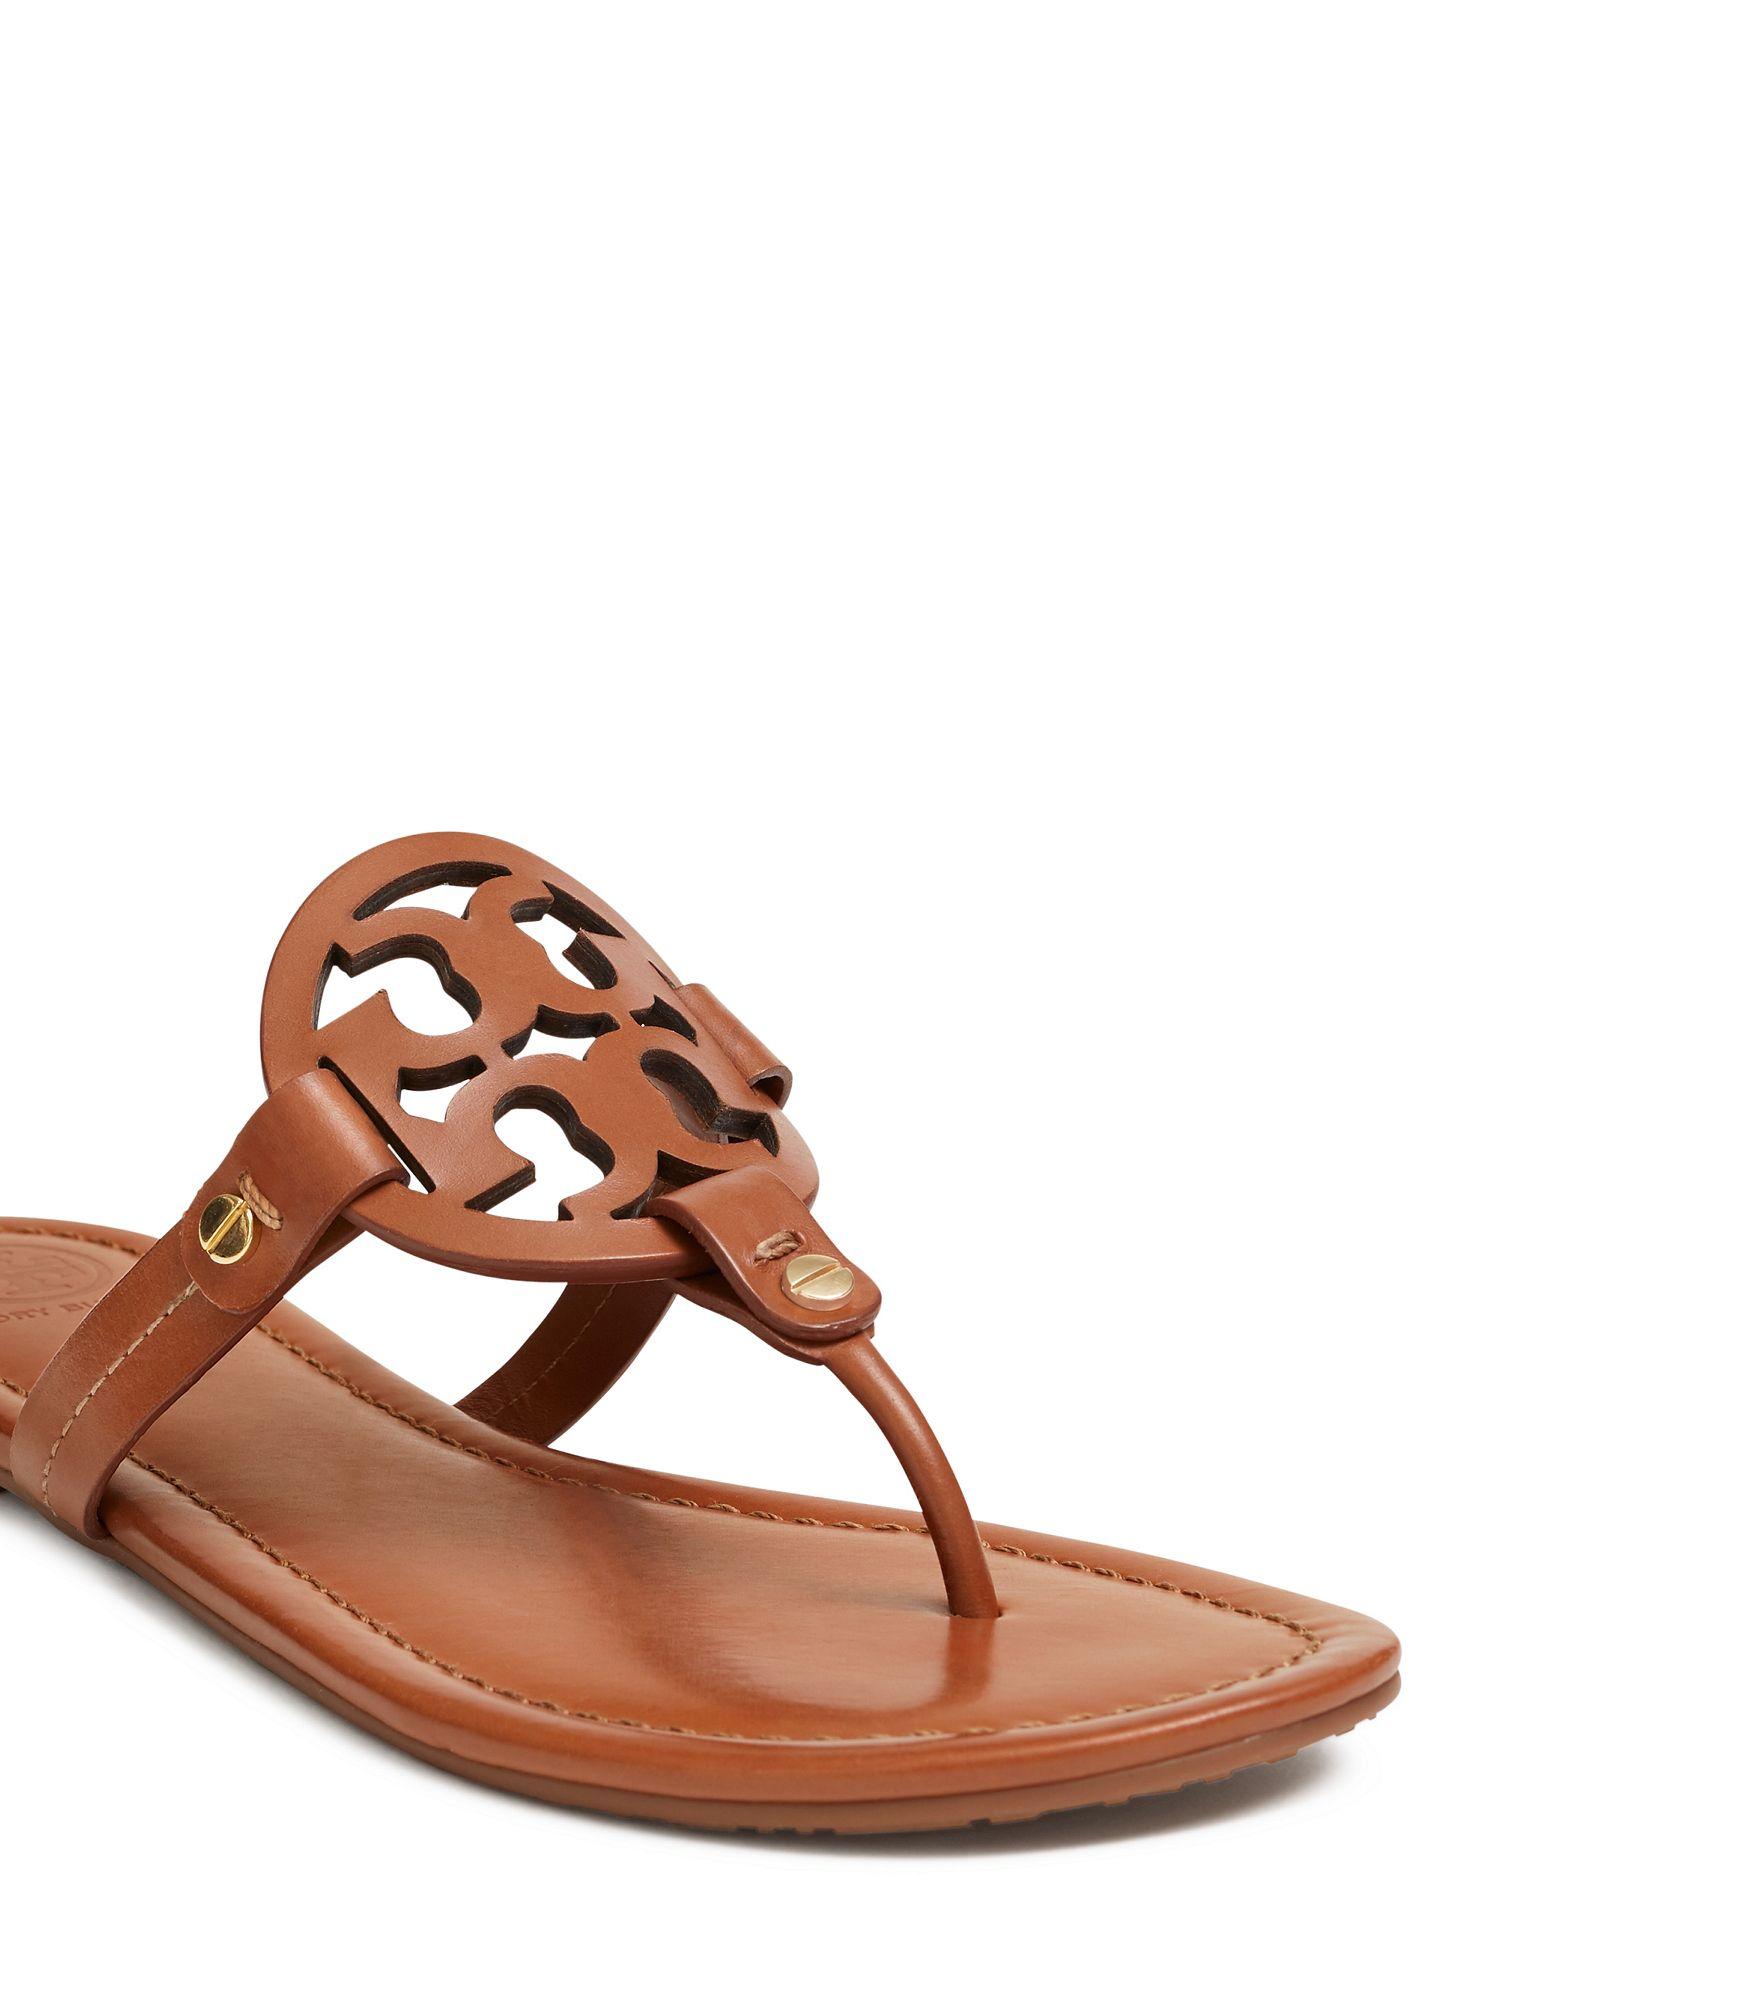 Tory Burch Miller Sandals, Leather in Tan (Brown) - Lyst